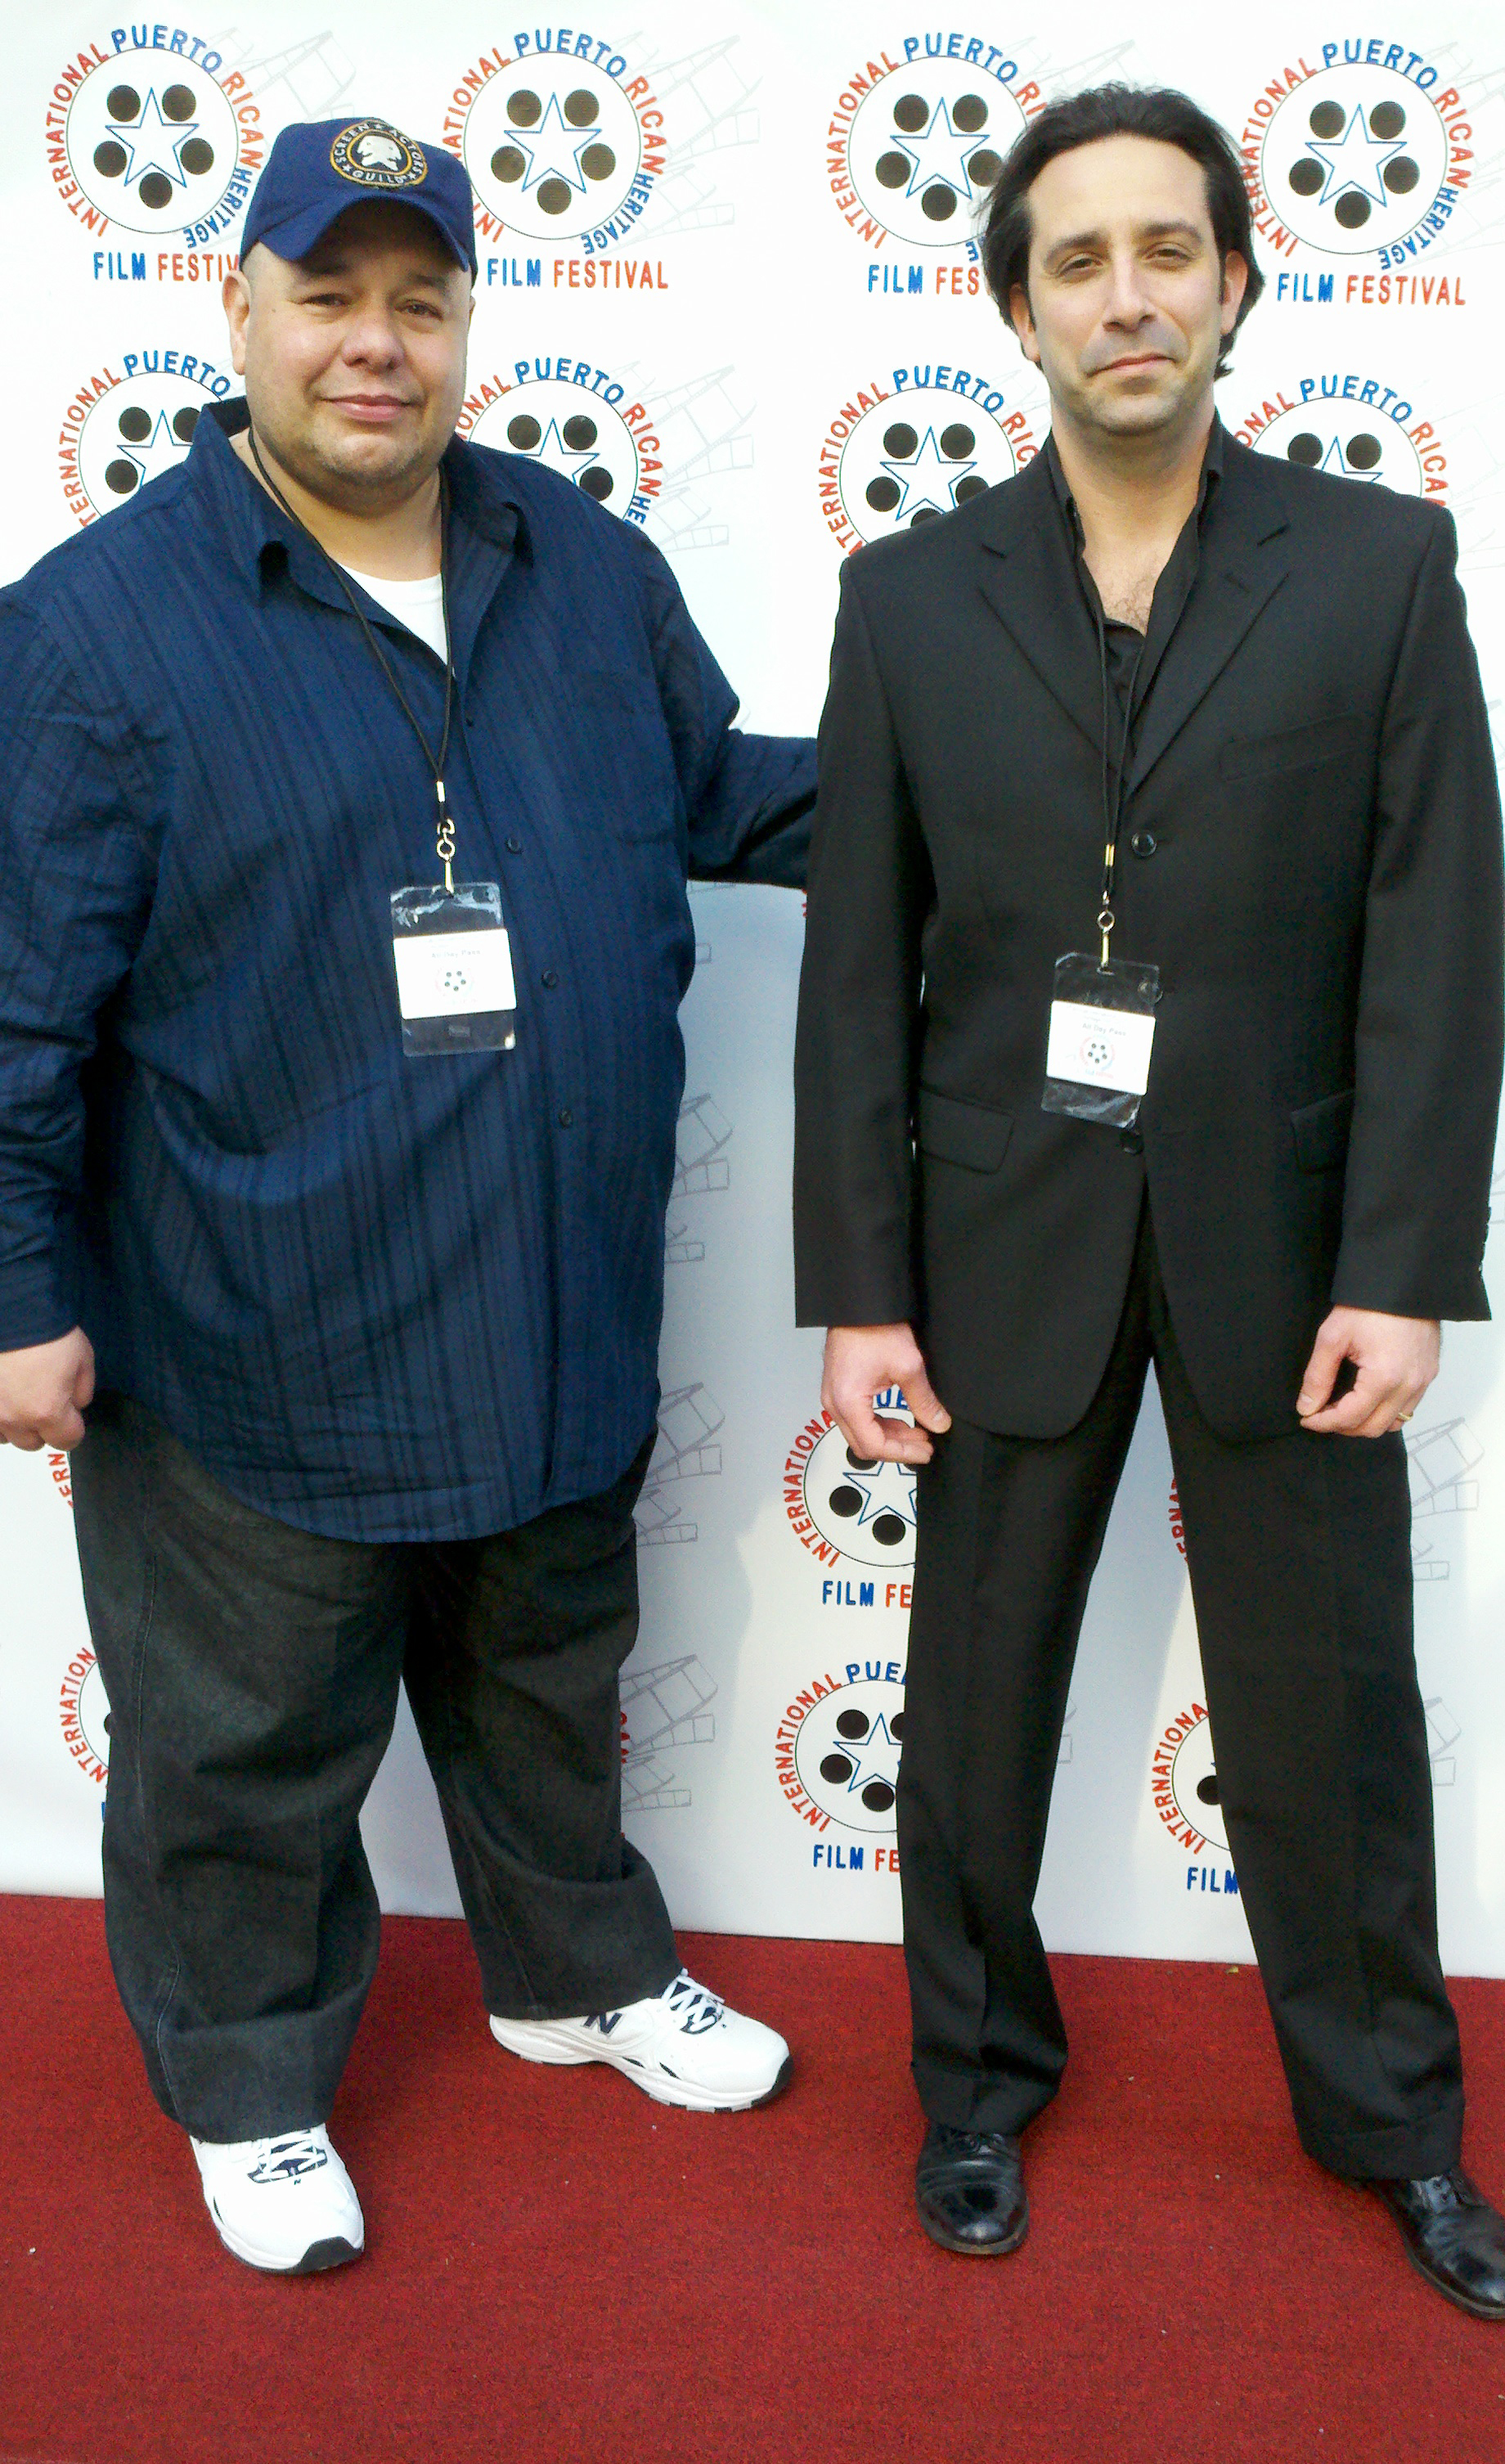 Ricardo Cordero and Bill Sorice at the 1st Annual International Puerto Rican Heritage Film Festival, 2011